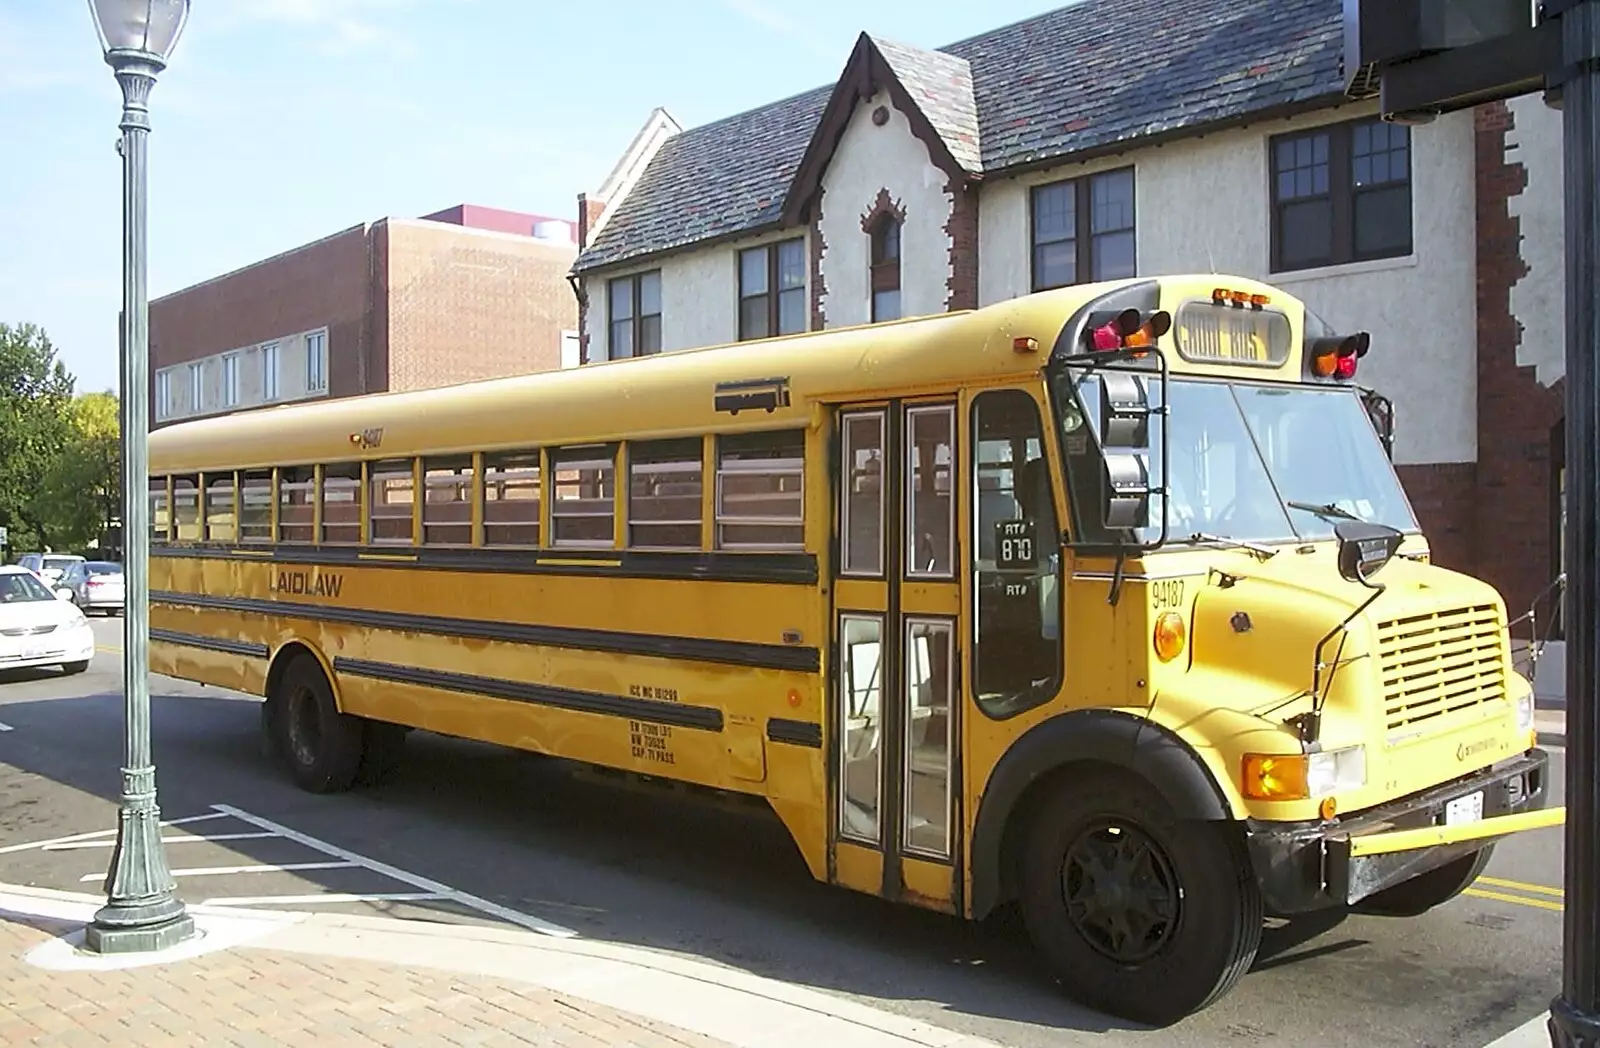 A yellow school bus, from A Trip to Libertyville, Illinois, USA - 31st August 2004